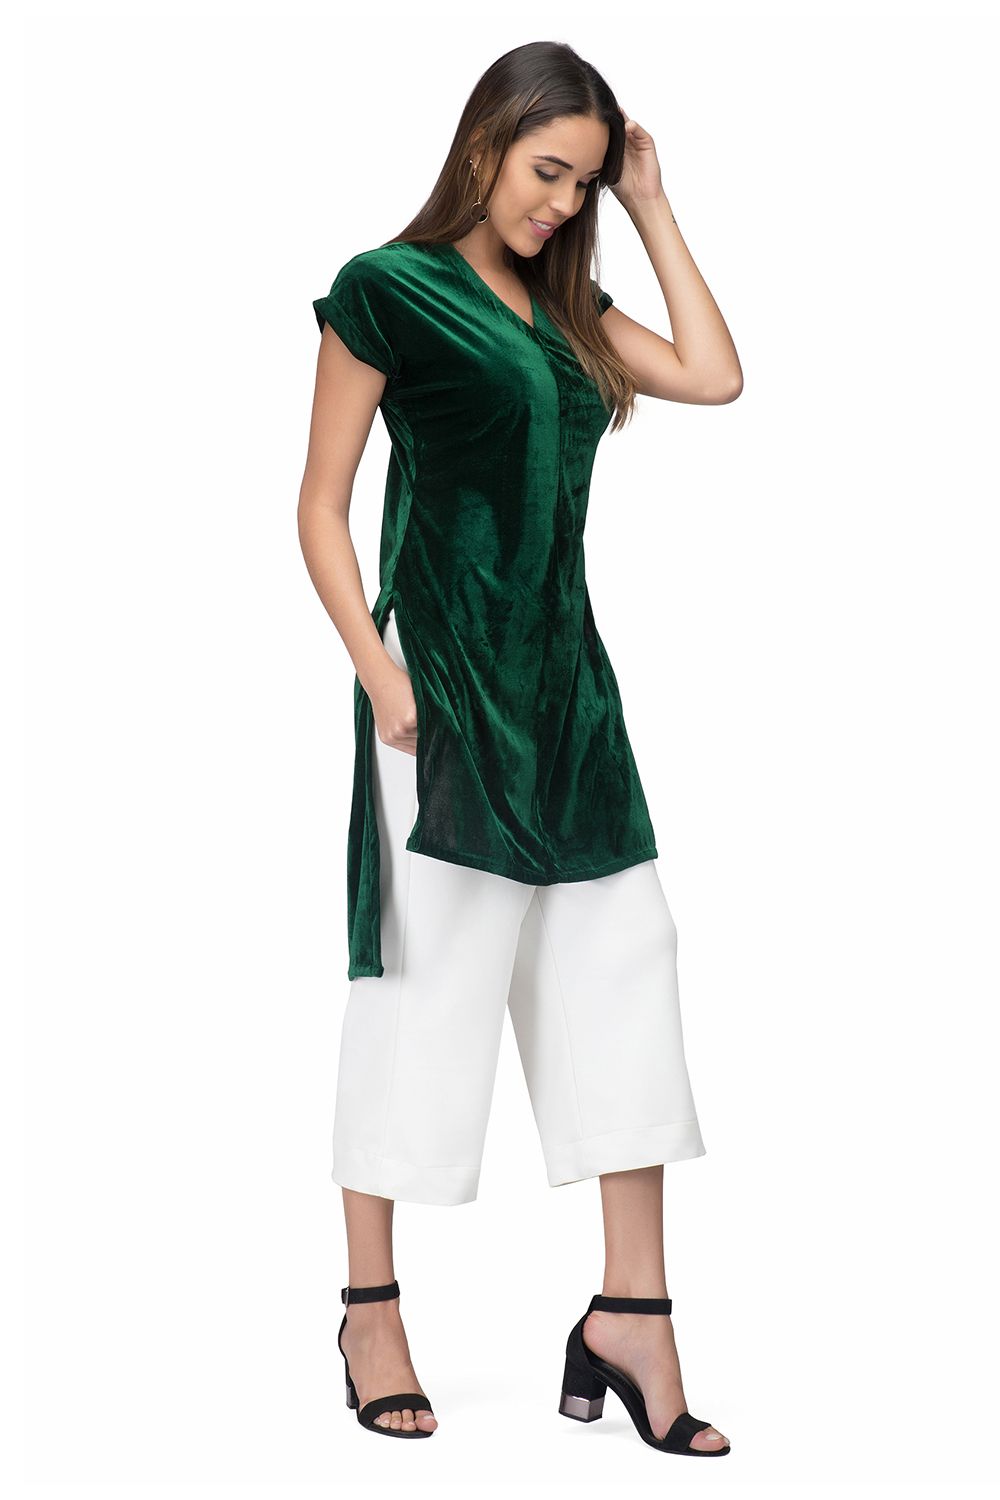 A relaxed fit winter kurta for evening galas during chilly nights